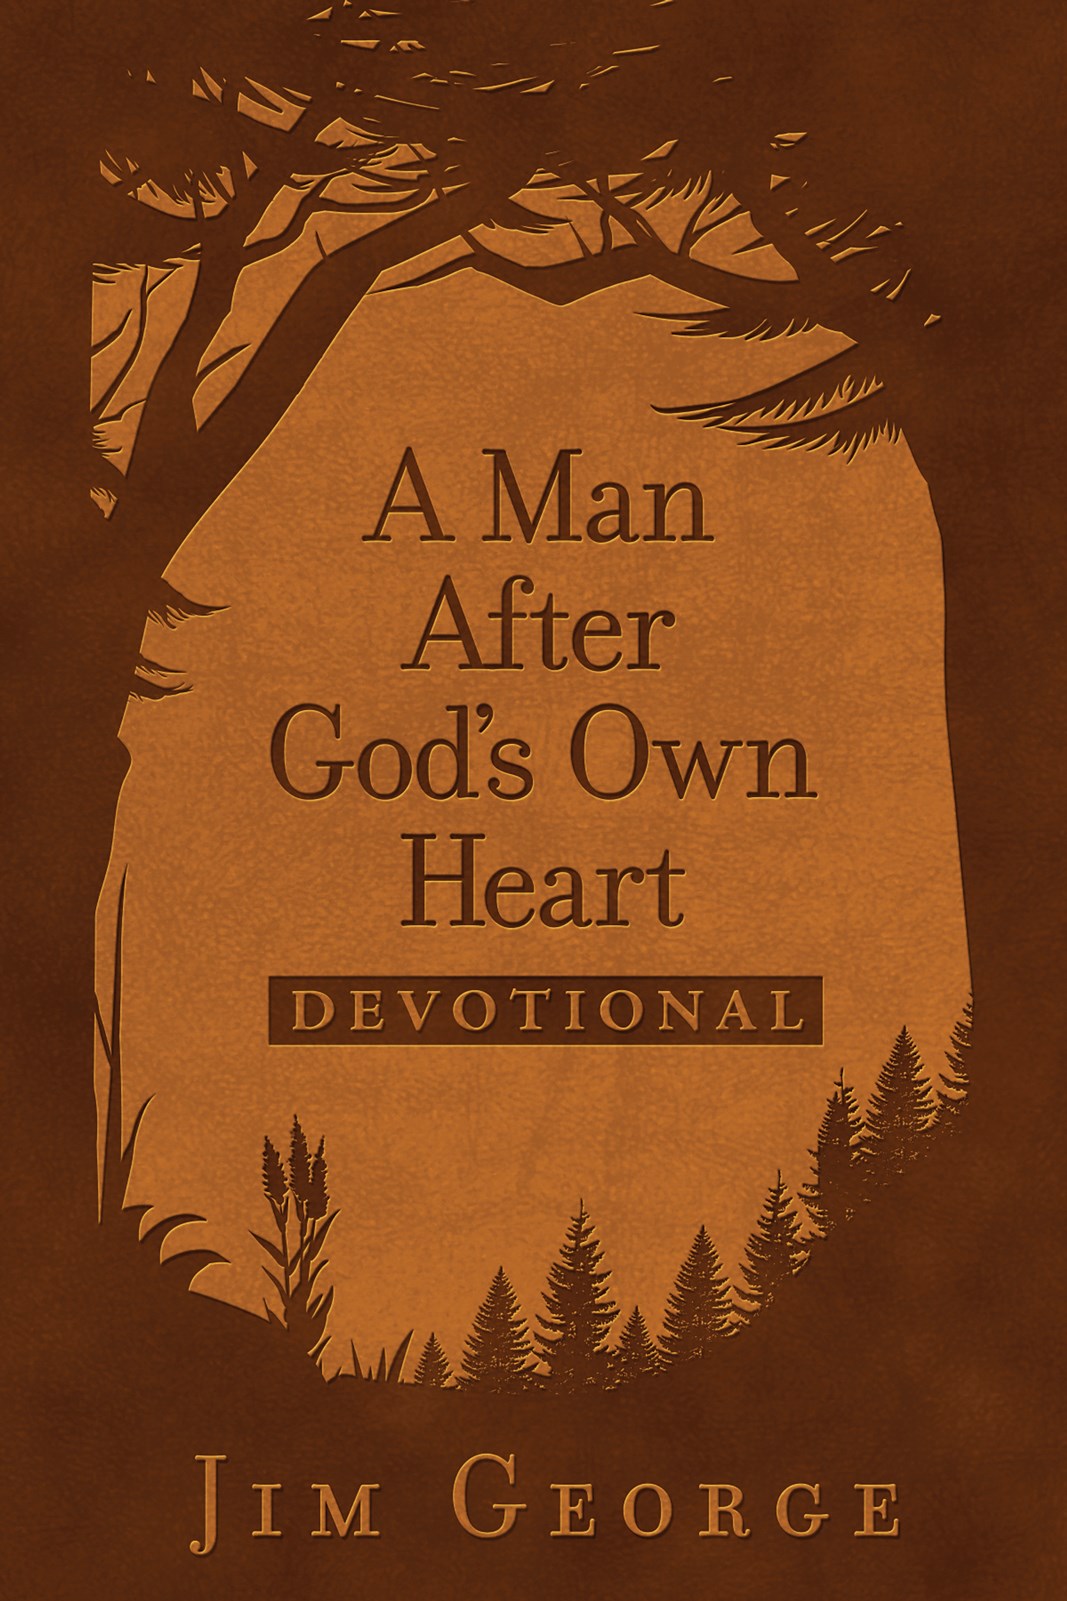 Seed of Abraham Christian Bookstore - Jim George - A Man After God&